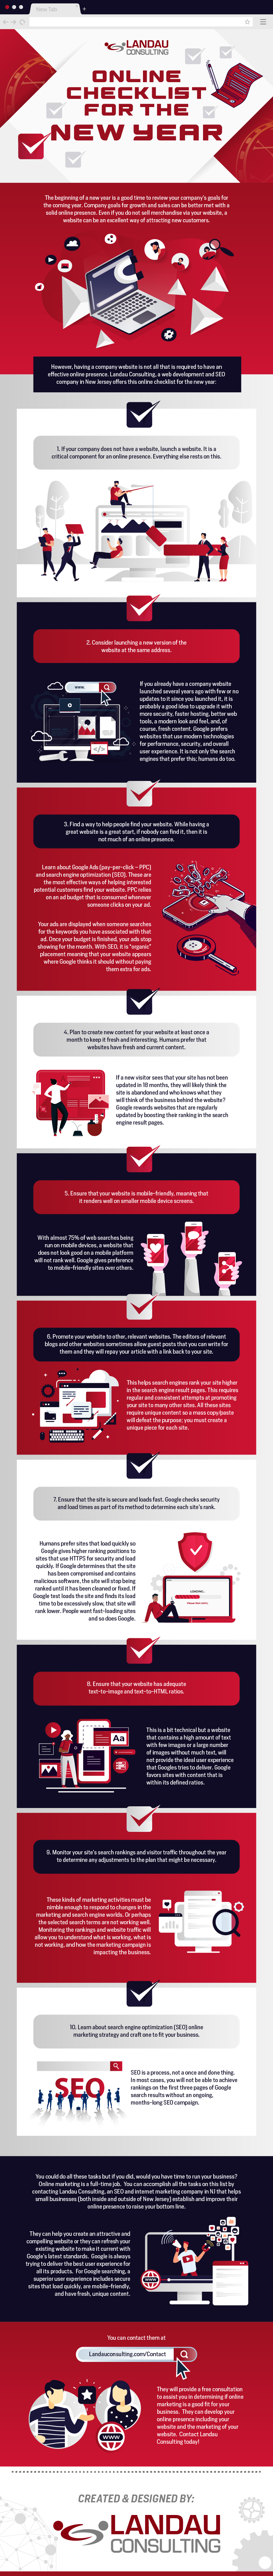 Online-Checklist-for-the-New-Year-infographic-image-001